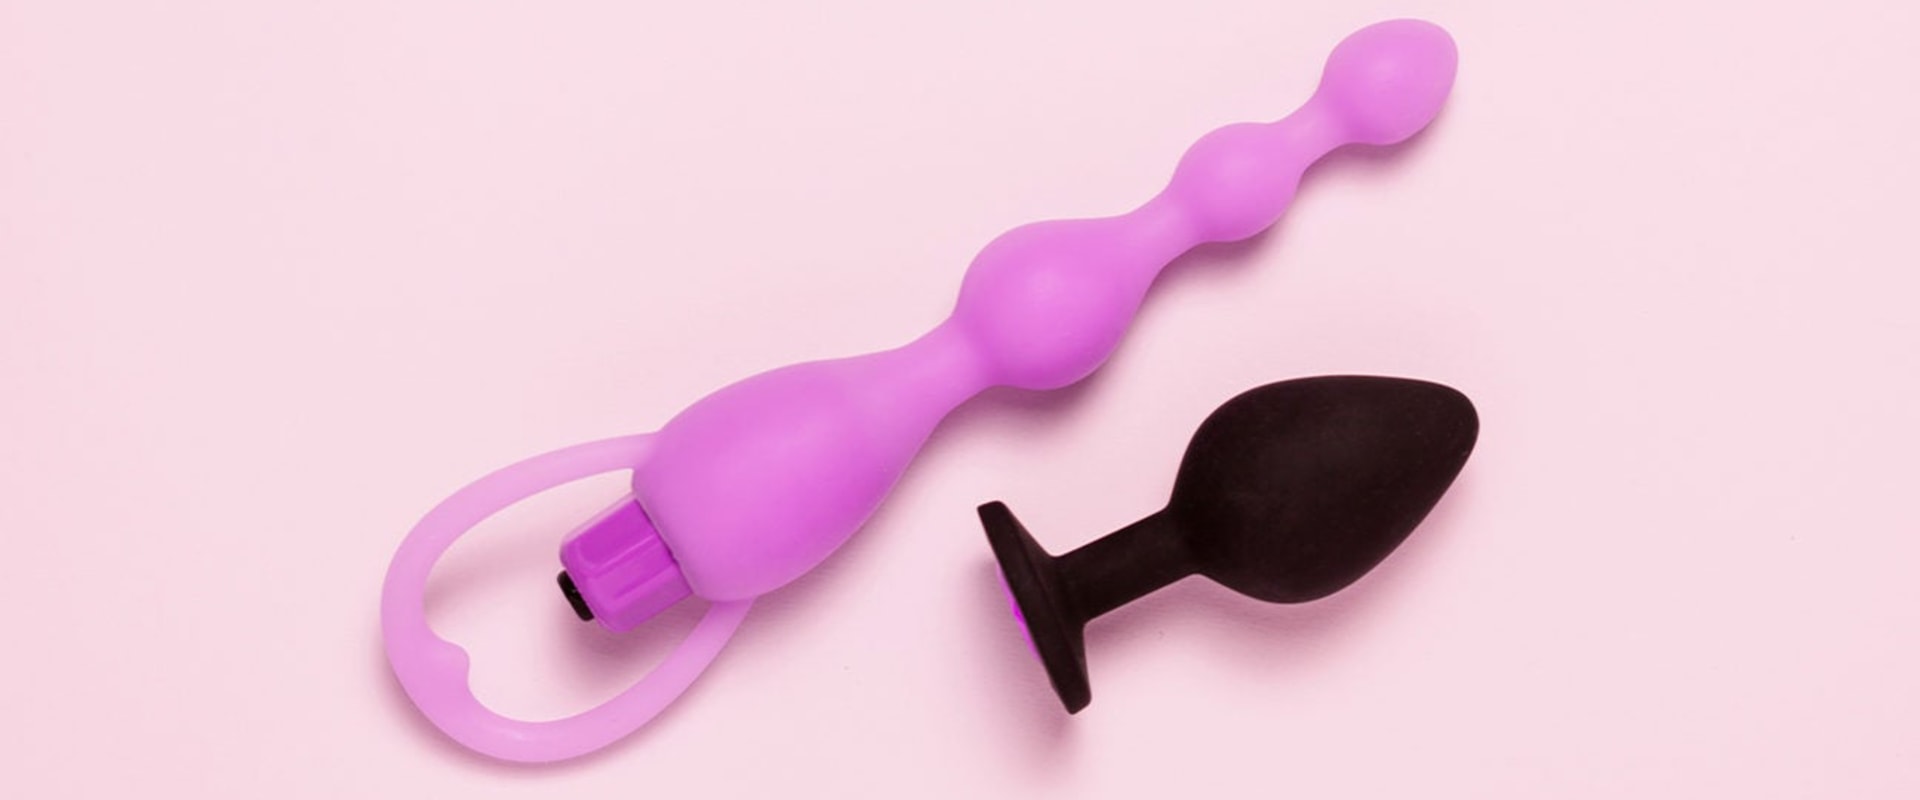 All You Need to Know About Butt Plug Vibrators